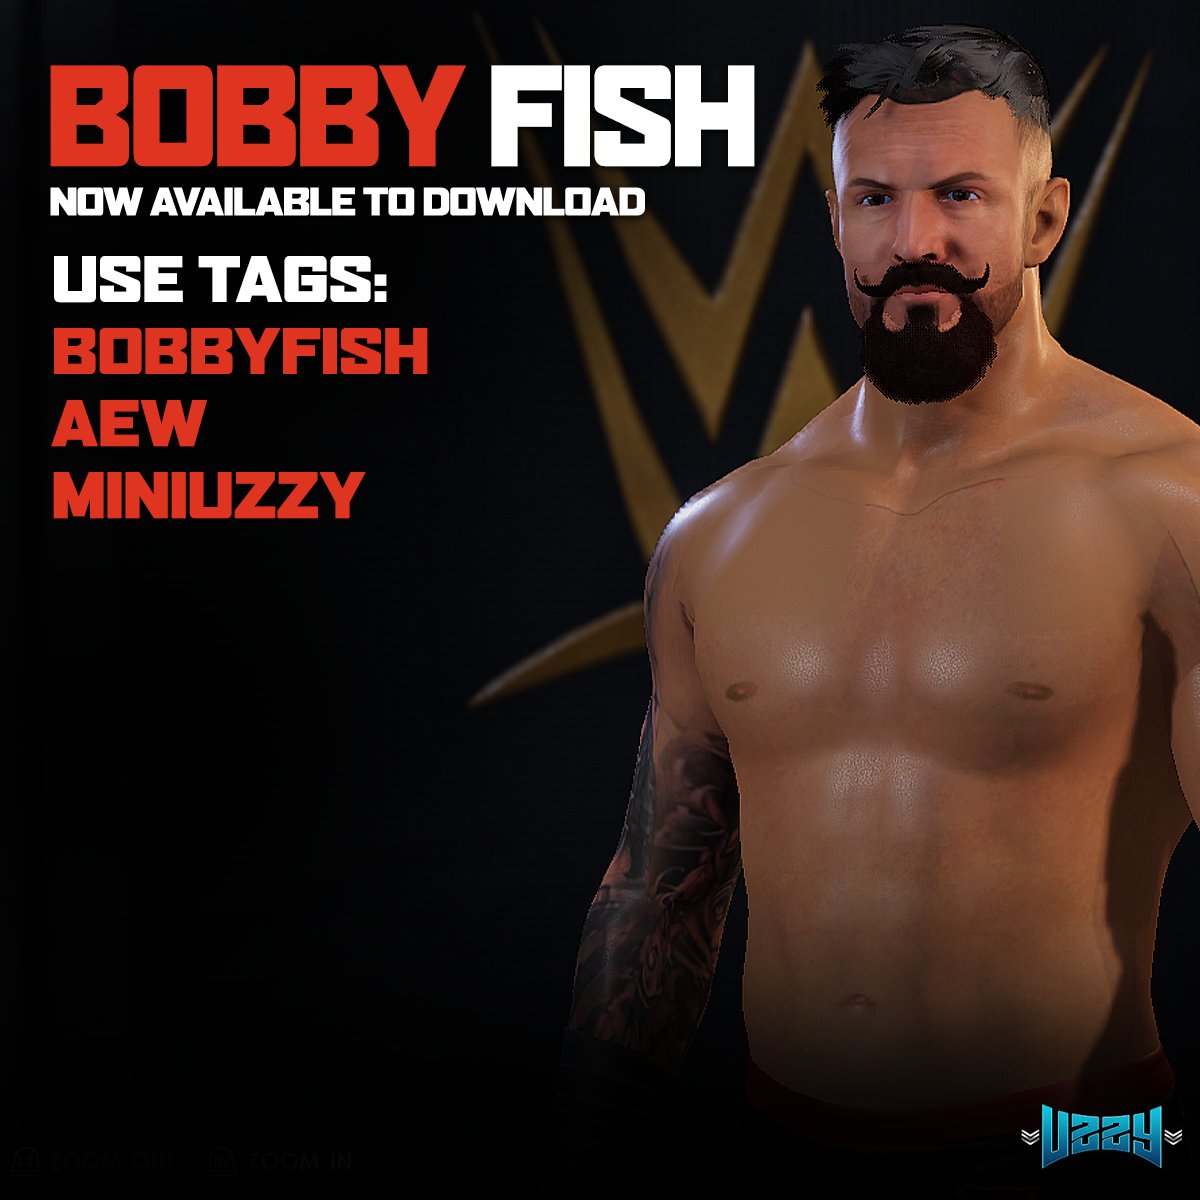 Bobby Fish now available to download on #WWE2K22 CC. USE TAGS: BOBBYFISH - AEW - MINIUZZY.